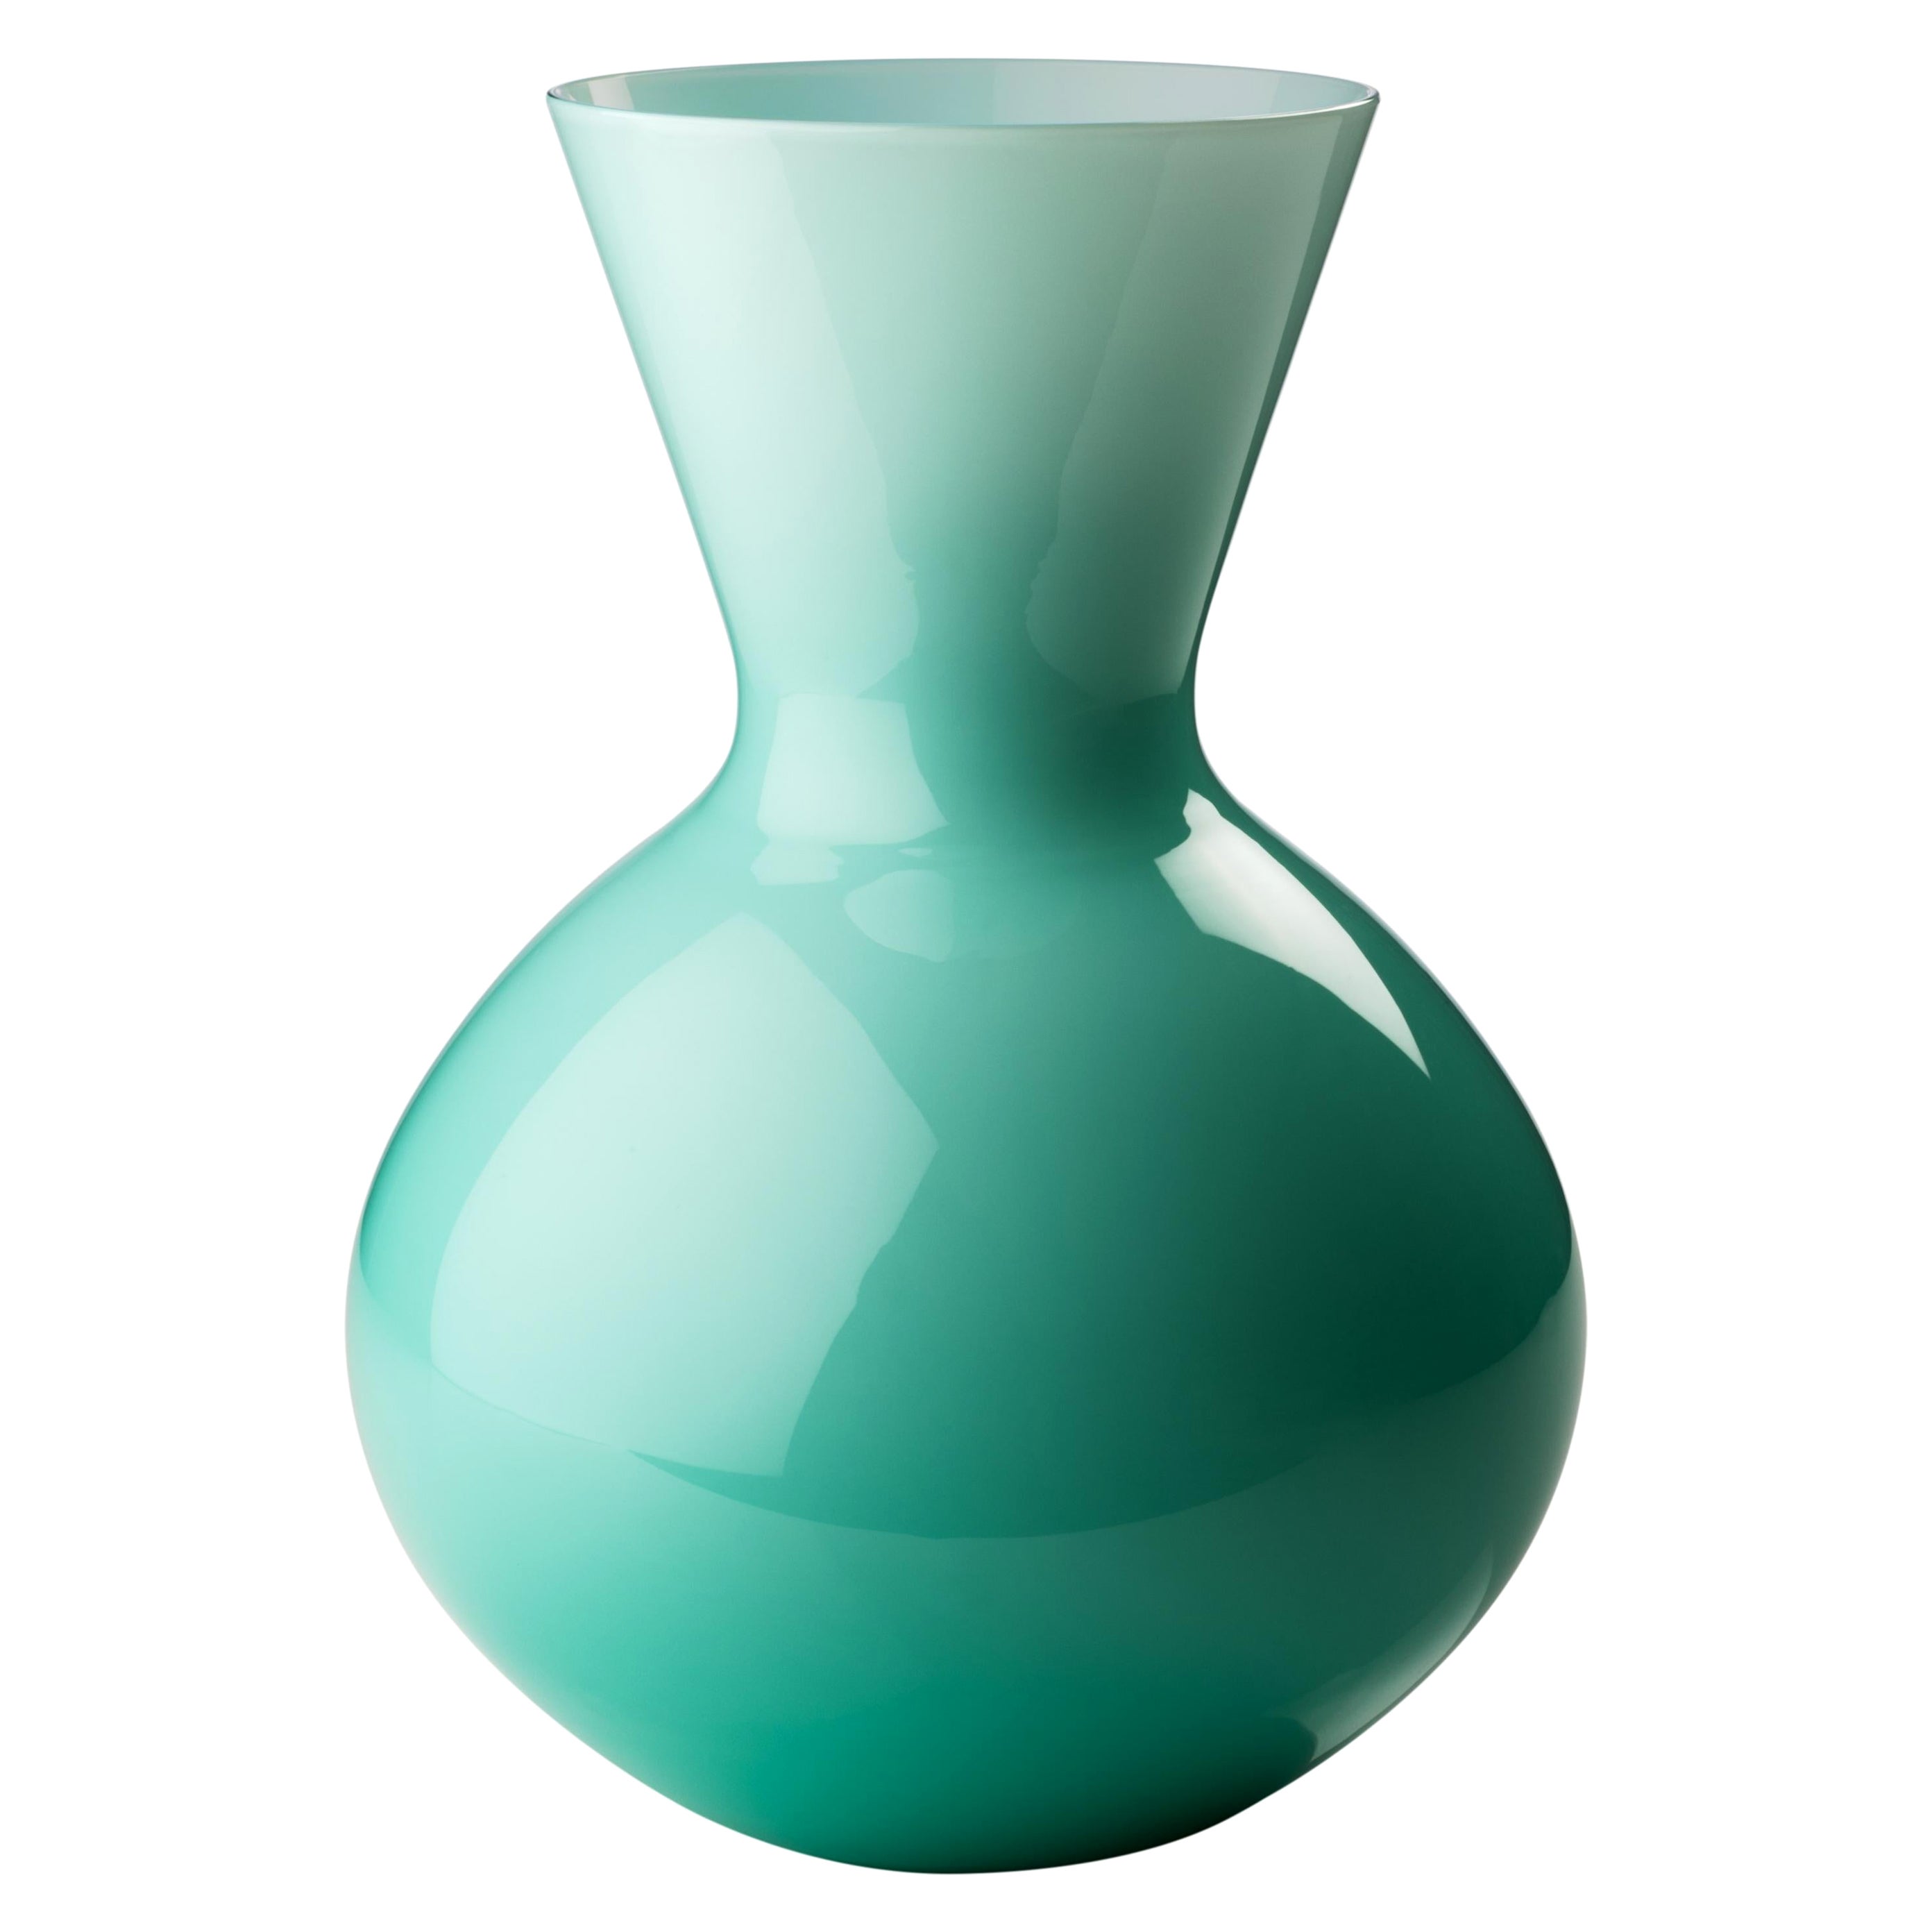 Idria Large Round Glass Vase in Mint Green by Venini